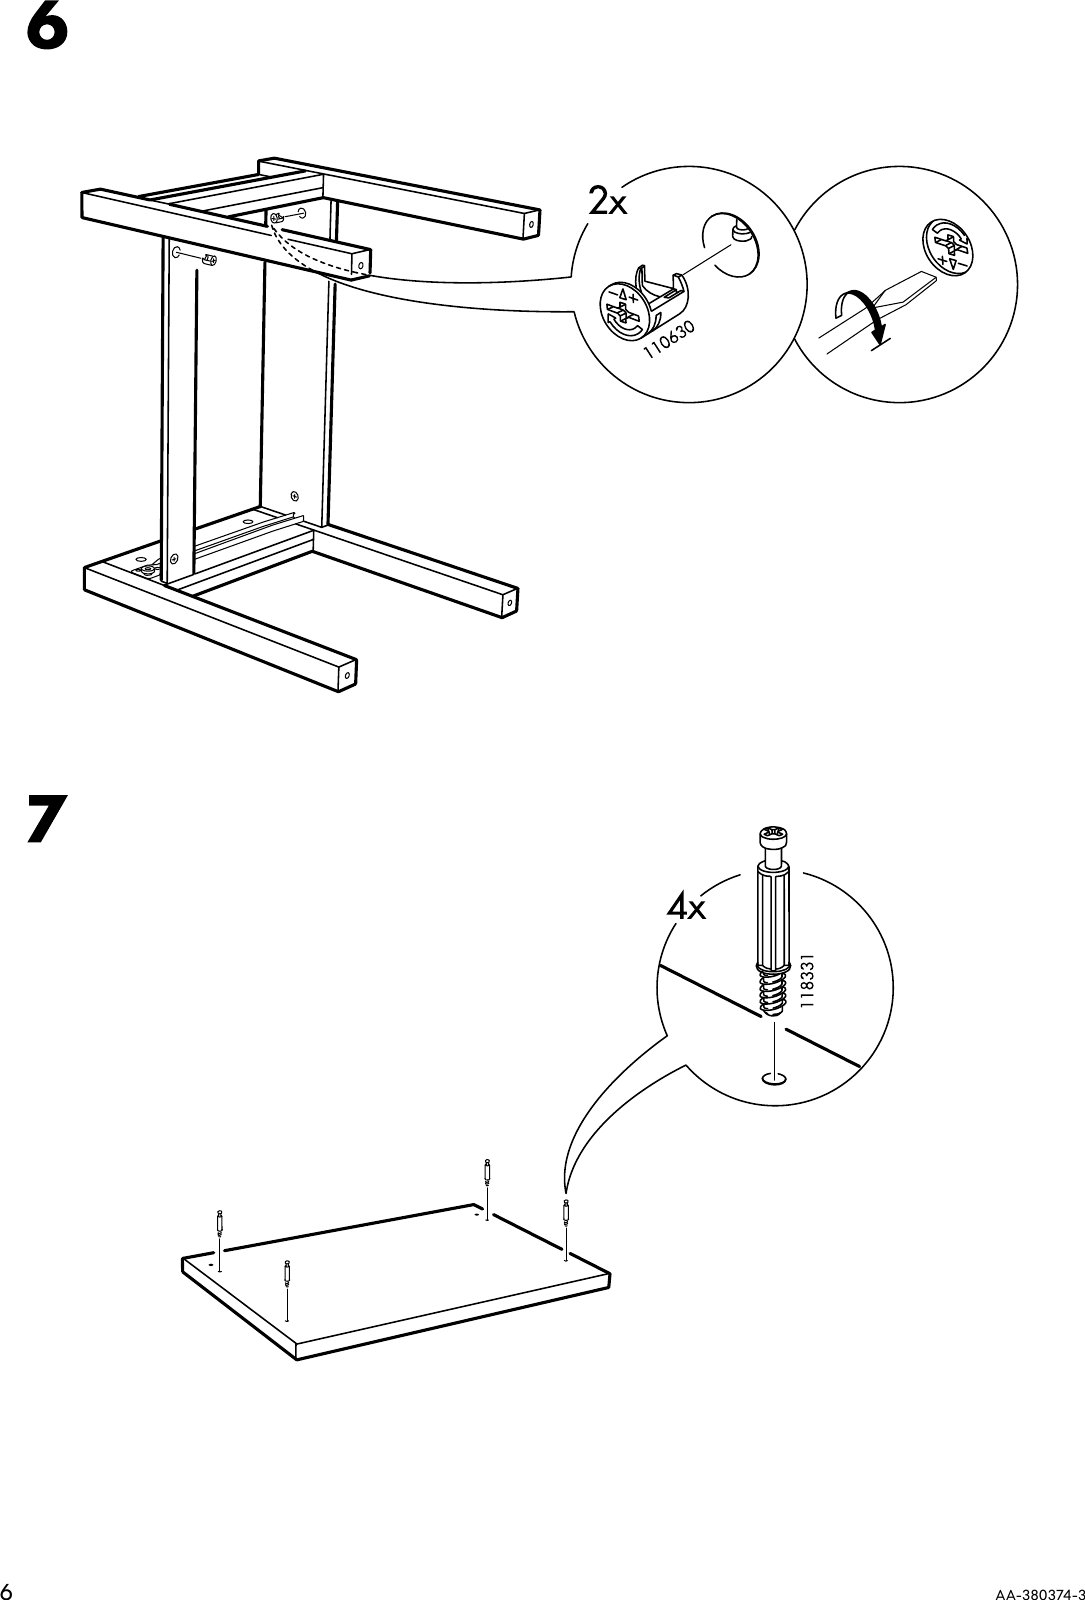 Page 6 of 12 - Ikea Ikea-Trondheim-Bedside-Table-Assembly-Instruction